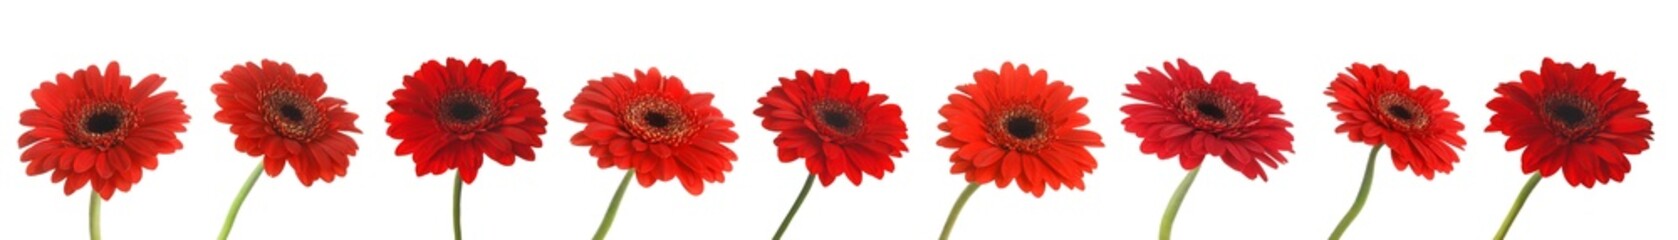 Set of beautiful red gerbera flowers on white background. Banner design